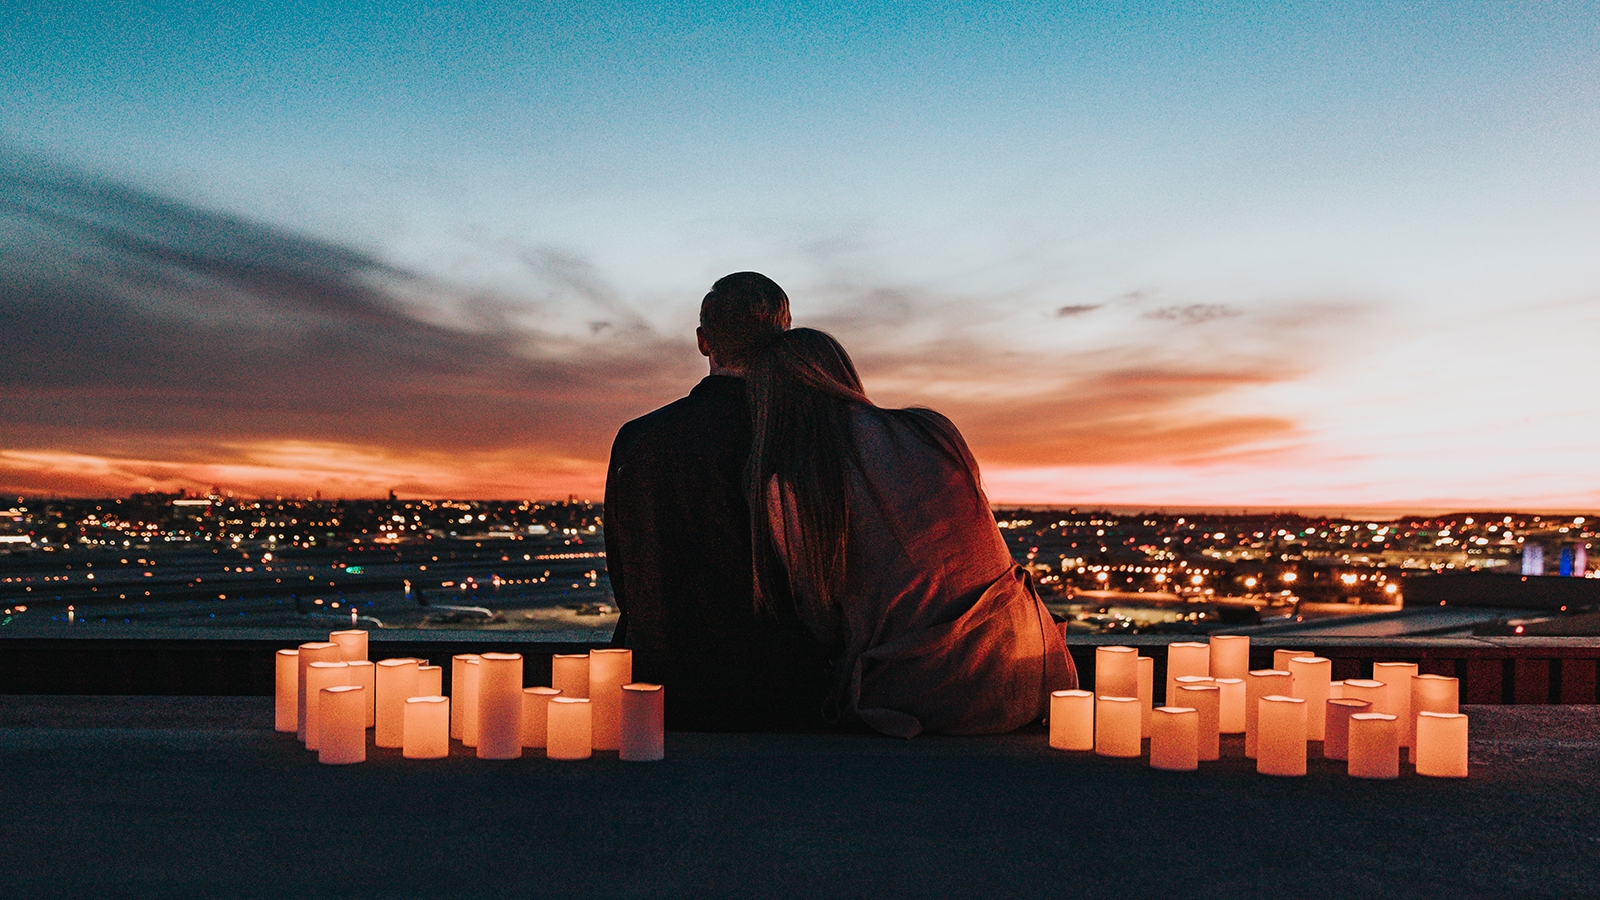 Date Night Ideas: Spend Quality Time With Your Partner